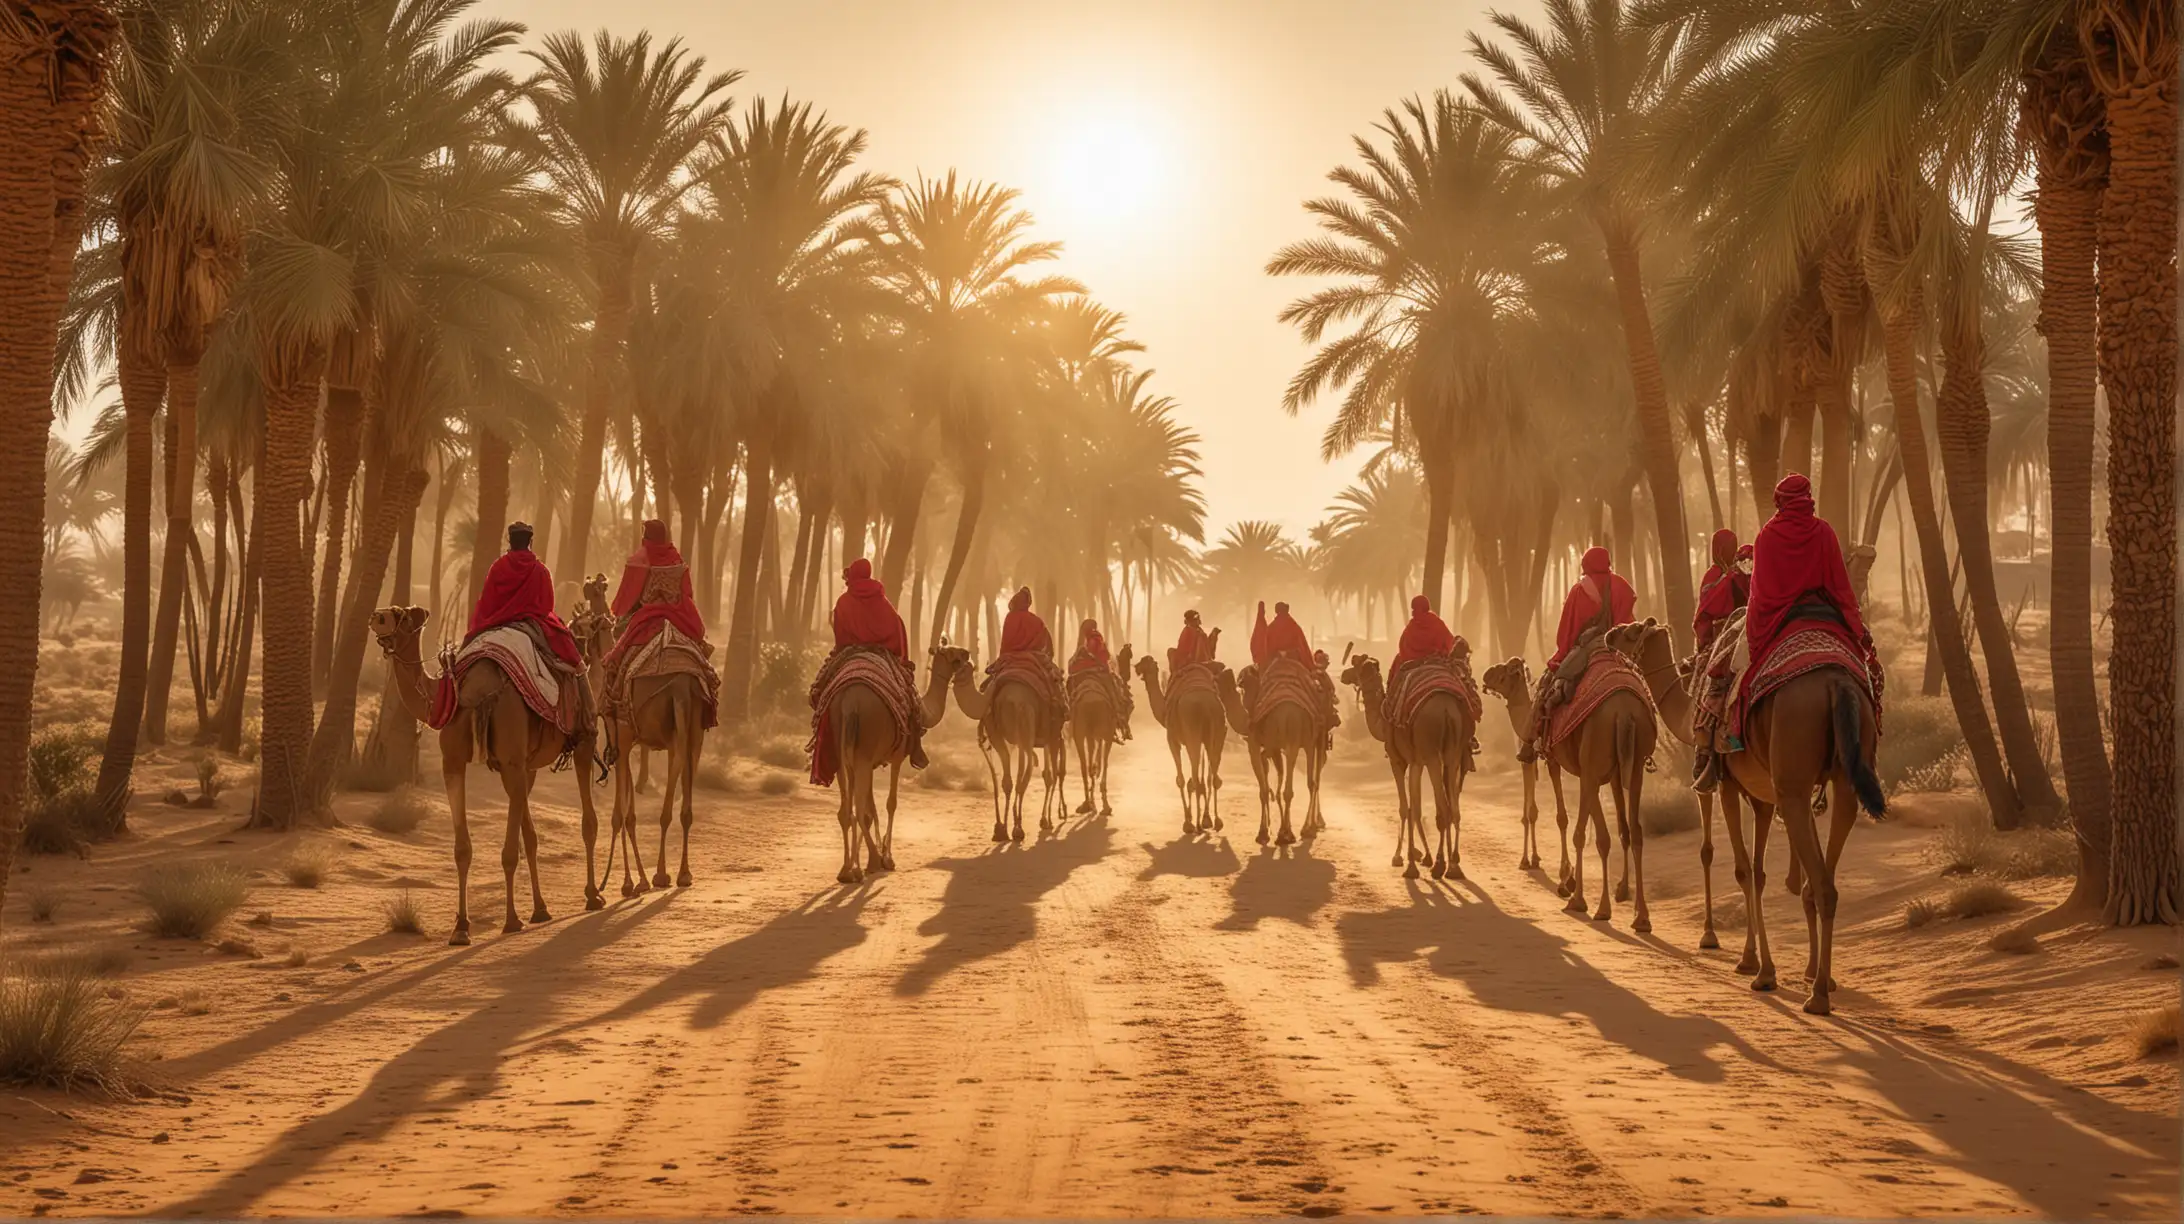 Queen of Sheba caravan on the way to meet king Salomon, crossing the desert, servants and soldiers, richly dressed in iron and silk, four legs only camels,  horses, richly adorned, carring tents and gifts, reaching an oasis, palm trees, ponds, sunset, gentle light, lots of gold, red